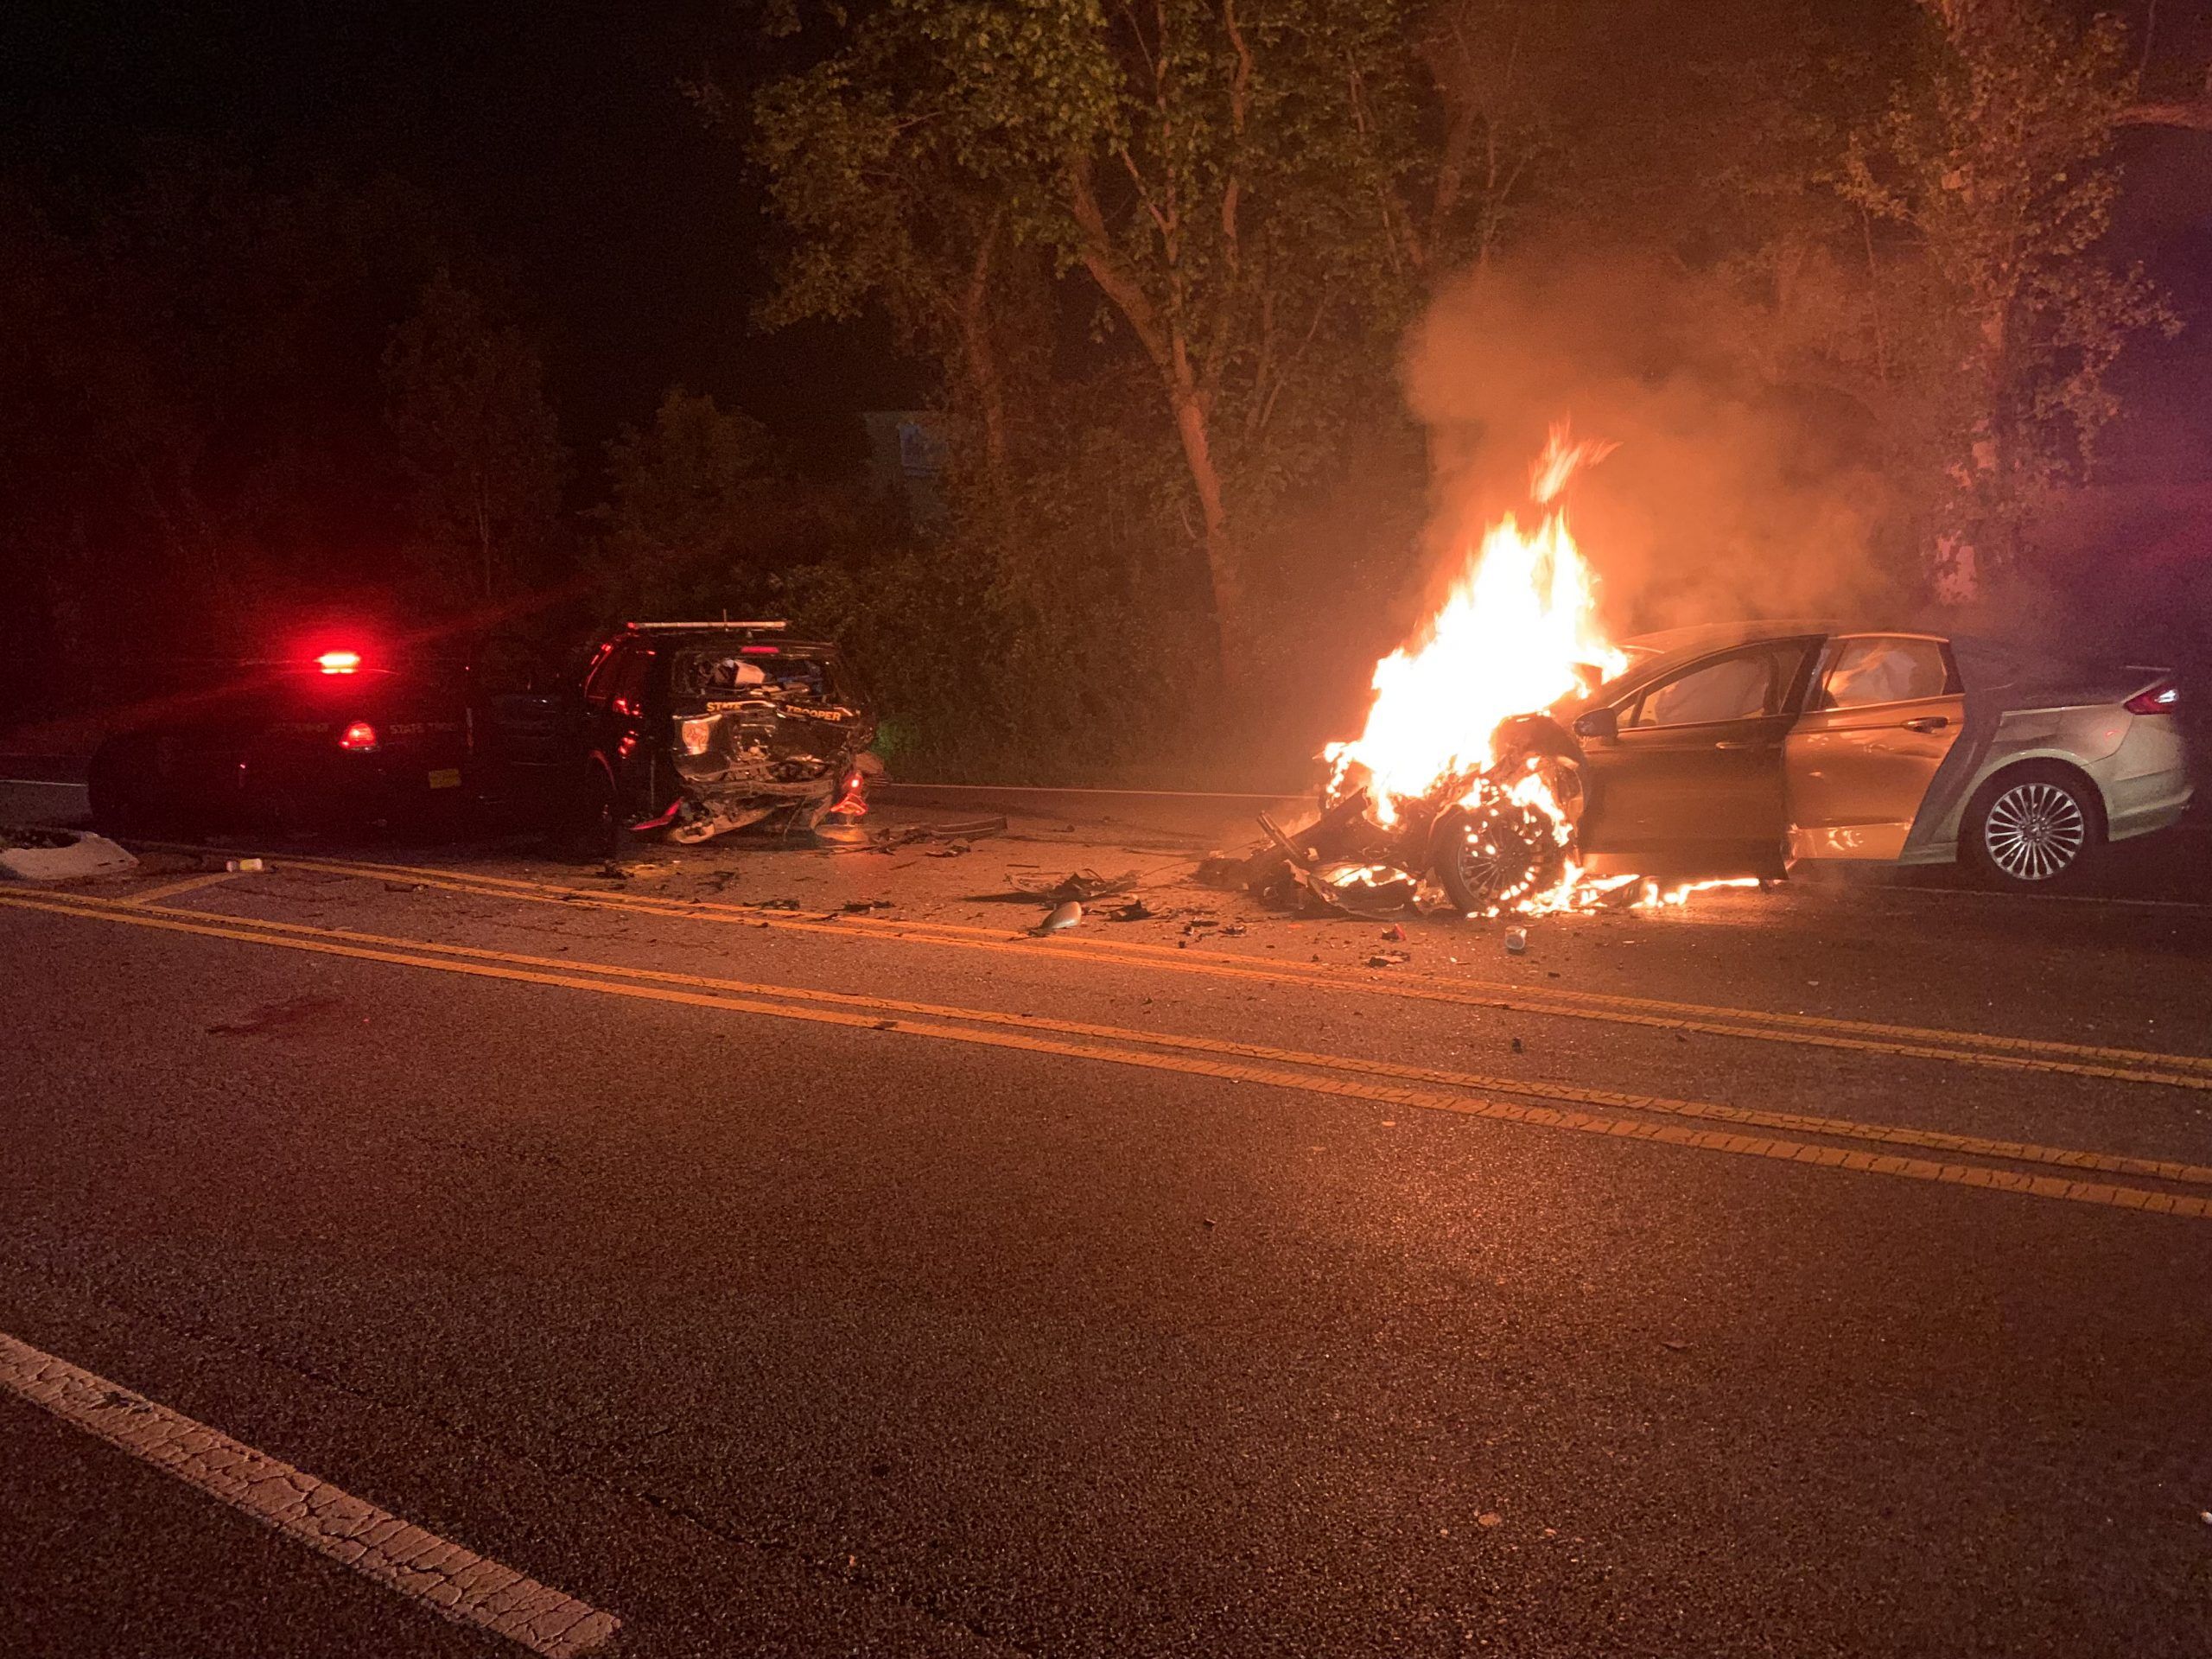 Maryland State Police rescue man from burning car in Beltsville, Md.